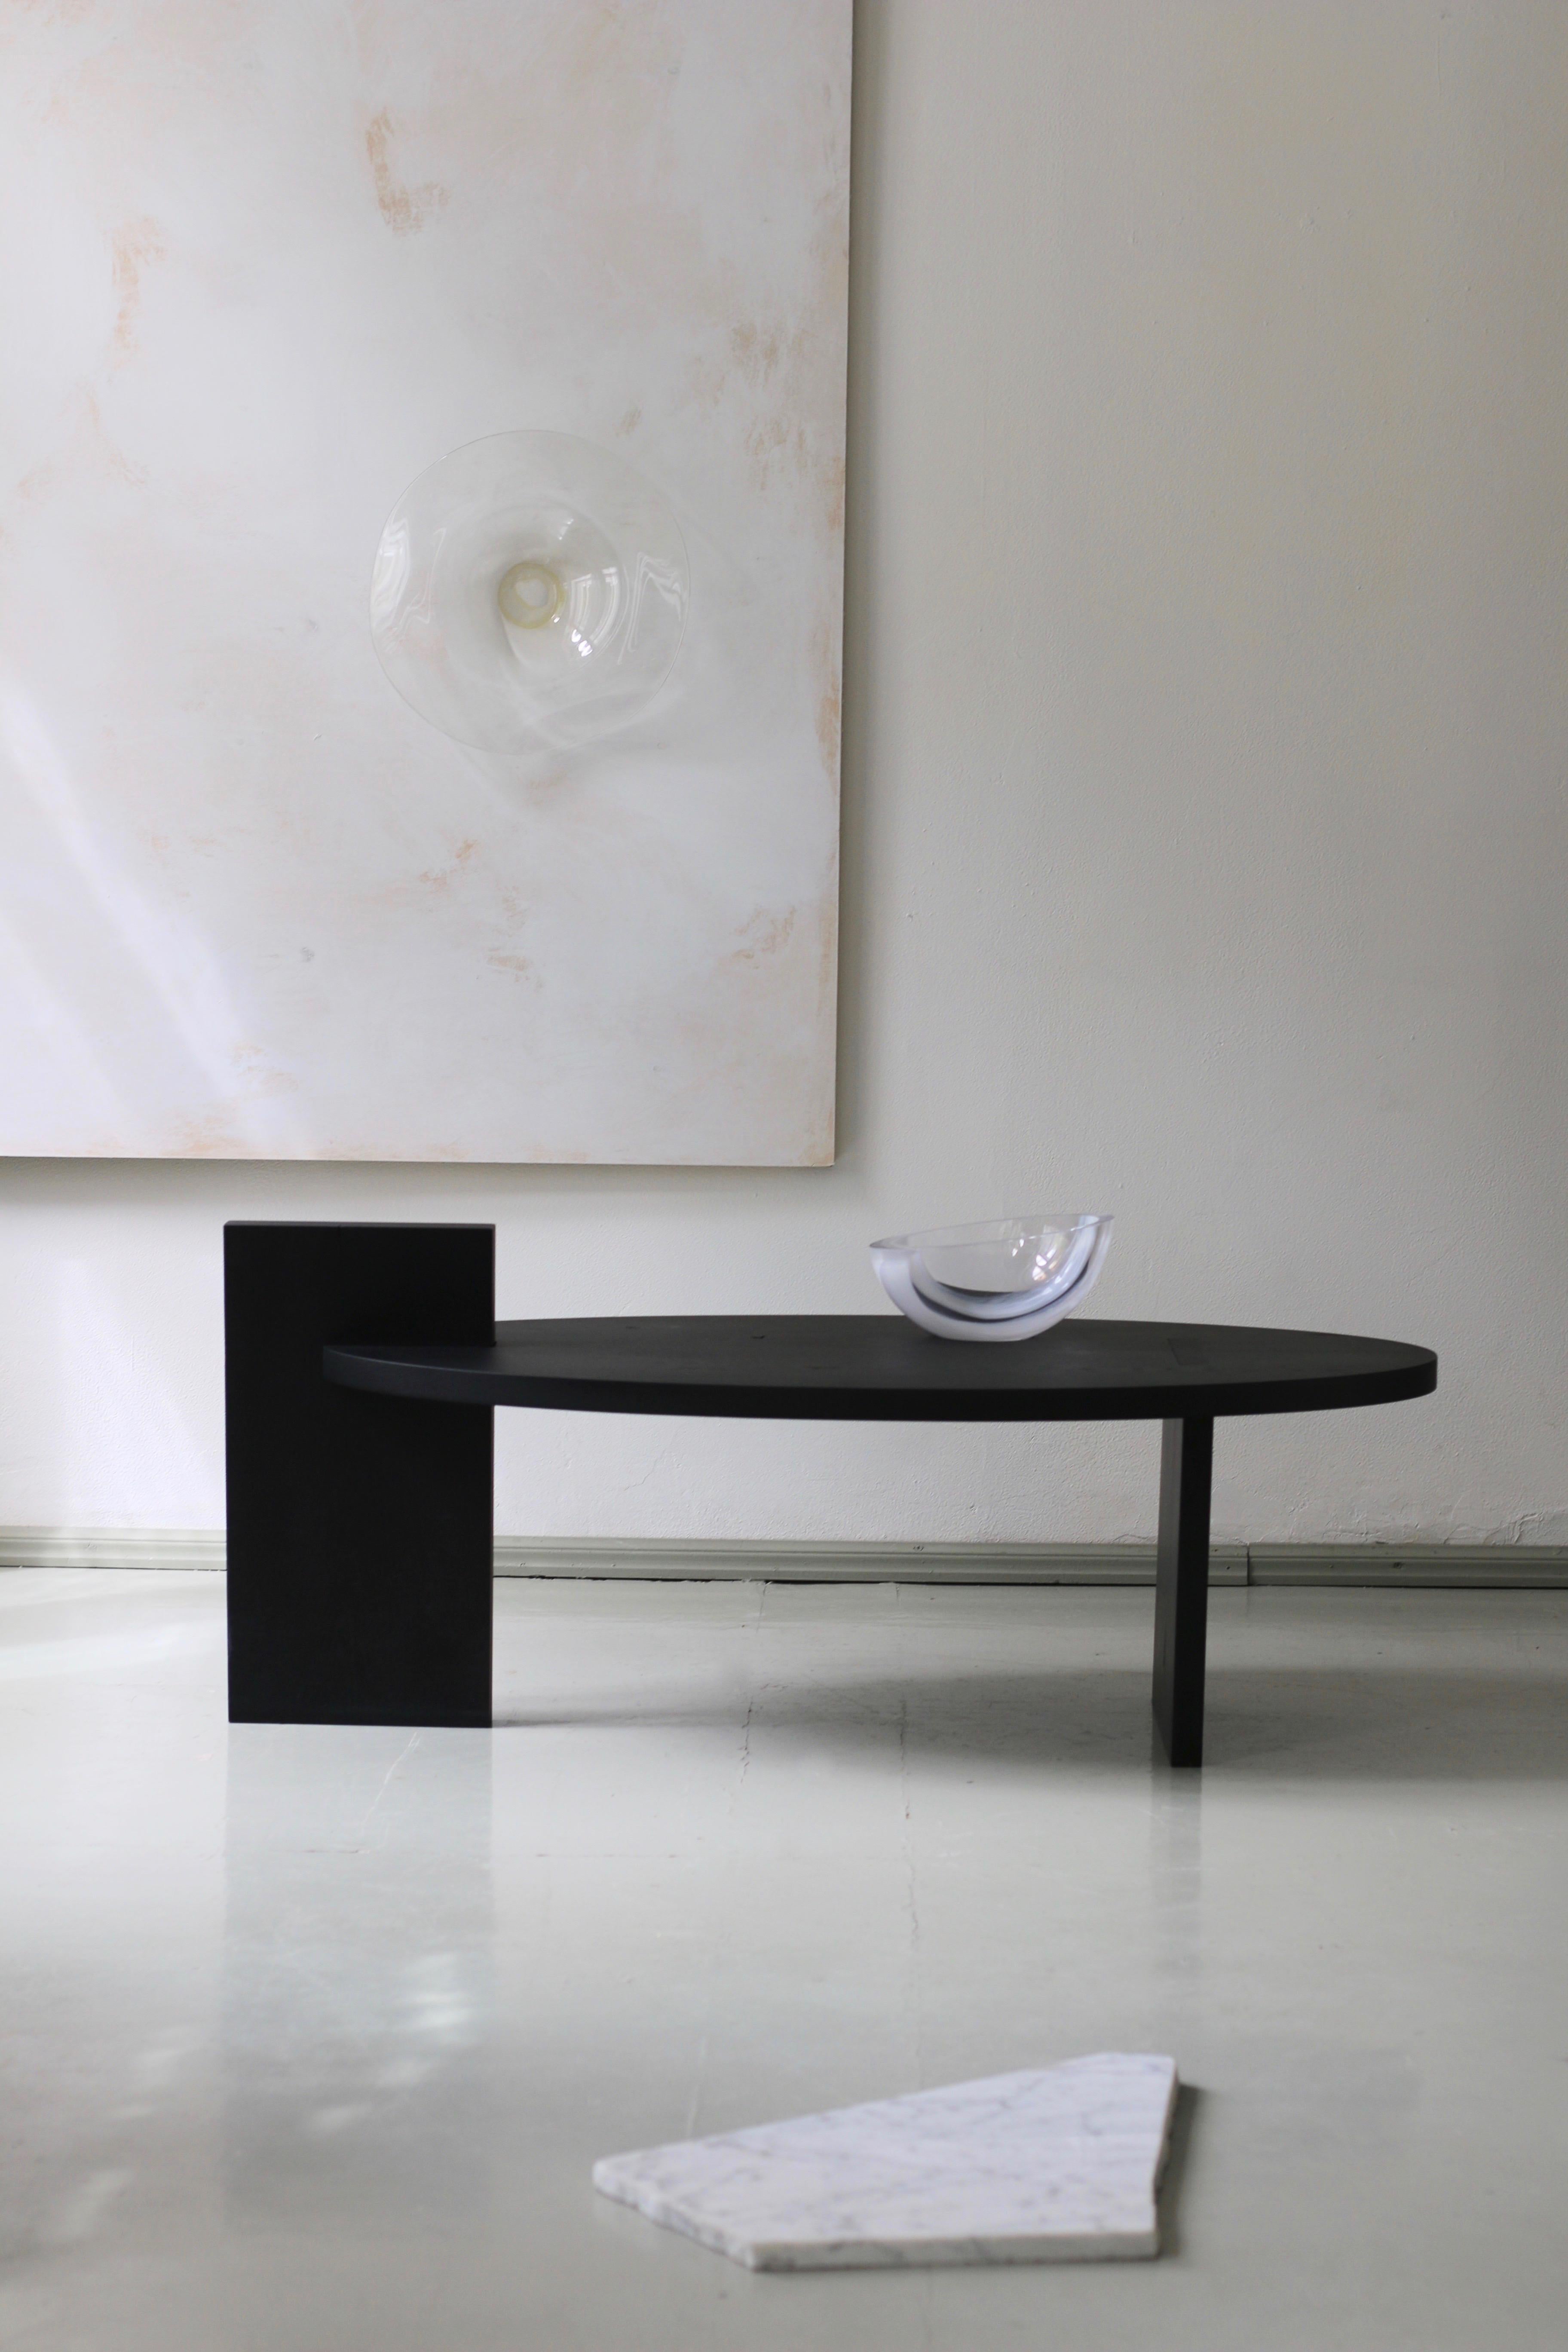 'Black Lotus' contemporary Minimalist coffee table is defined as ‘art with function’. It consists of only three pieces that are held together by interlocking geometrical cuts without additional bracing. 
Hand-picked solid oak slabs with natural